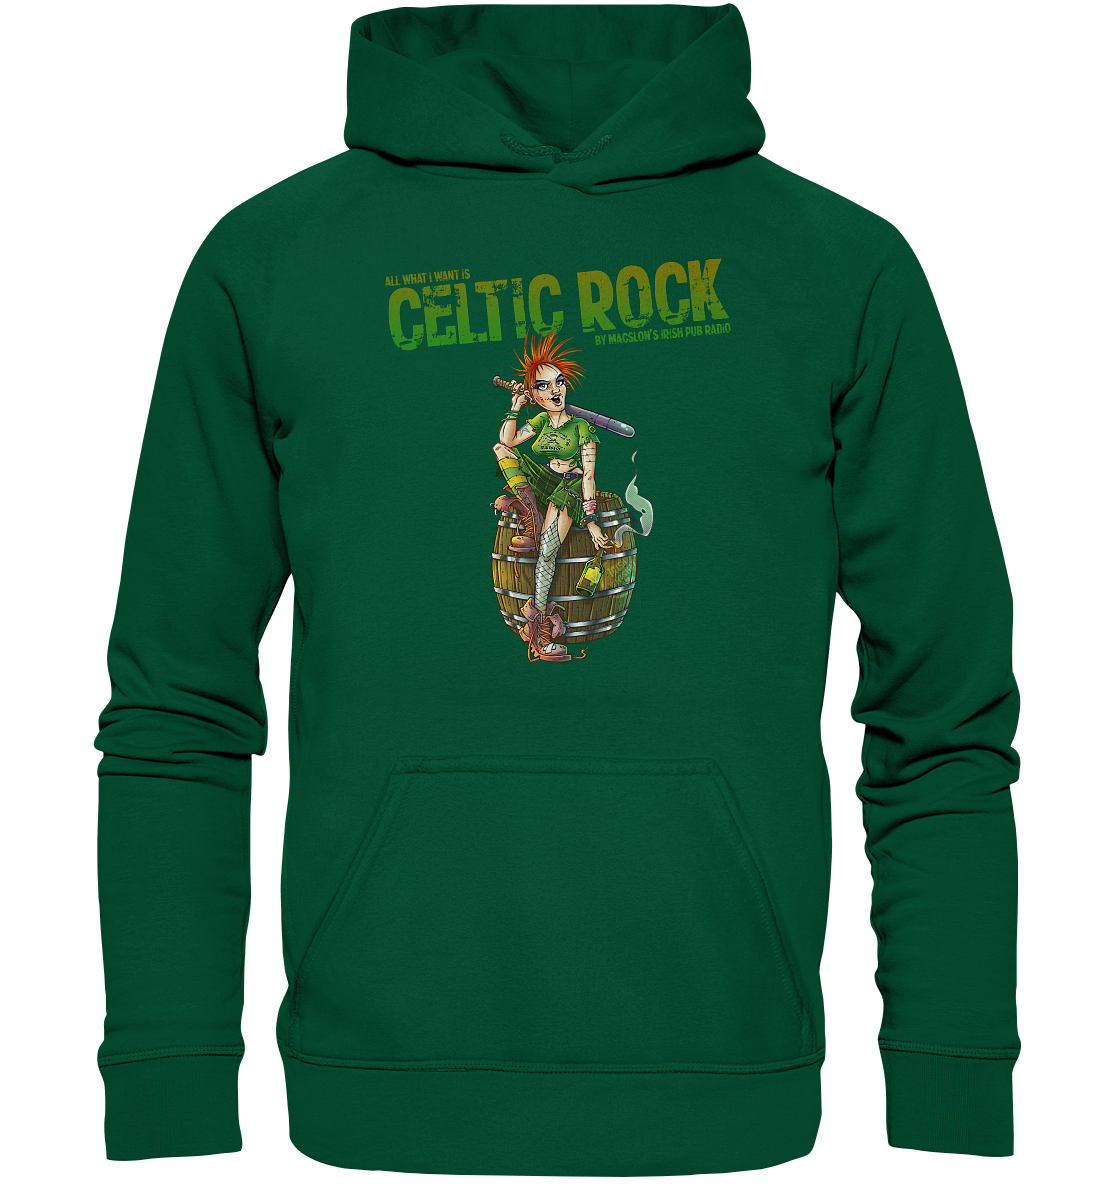 All What I Want Is "Celtic Rock" - Basic Unisex Hoodie